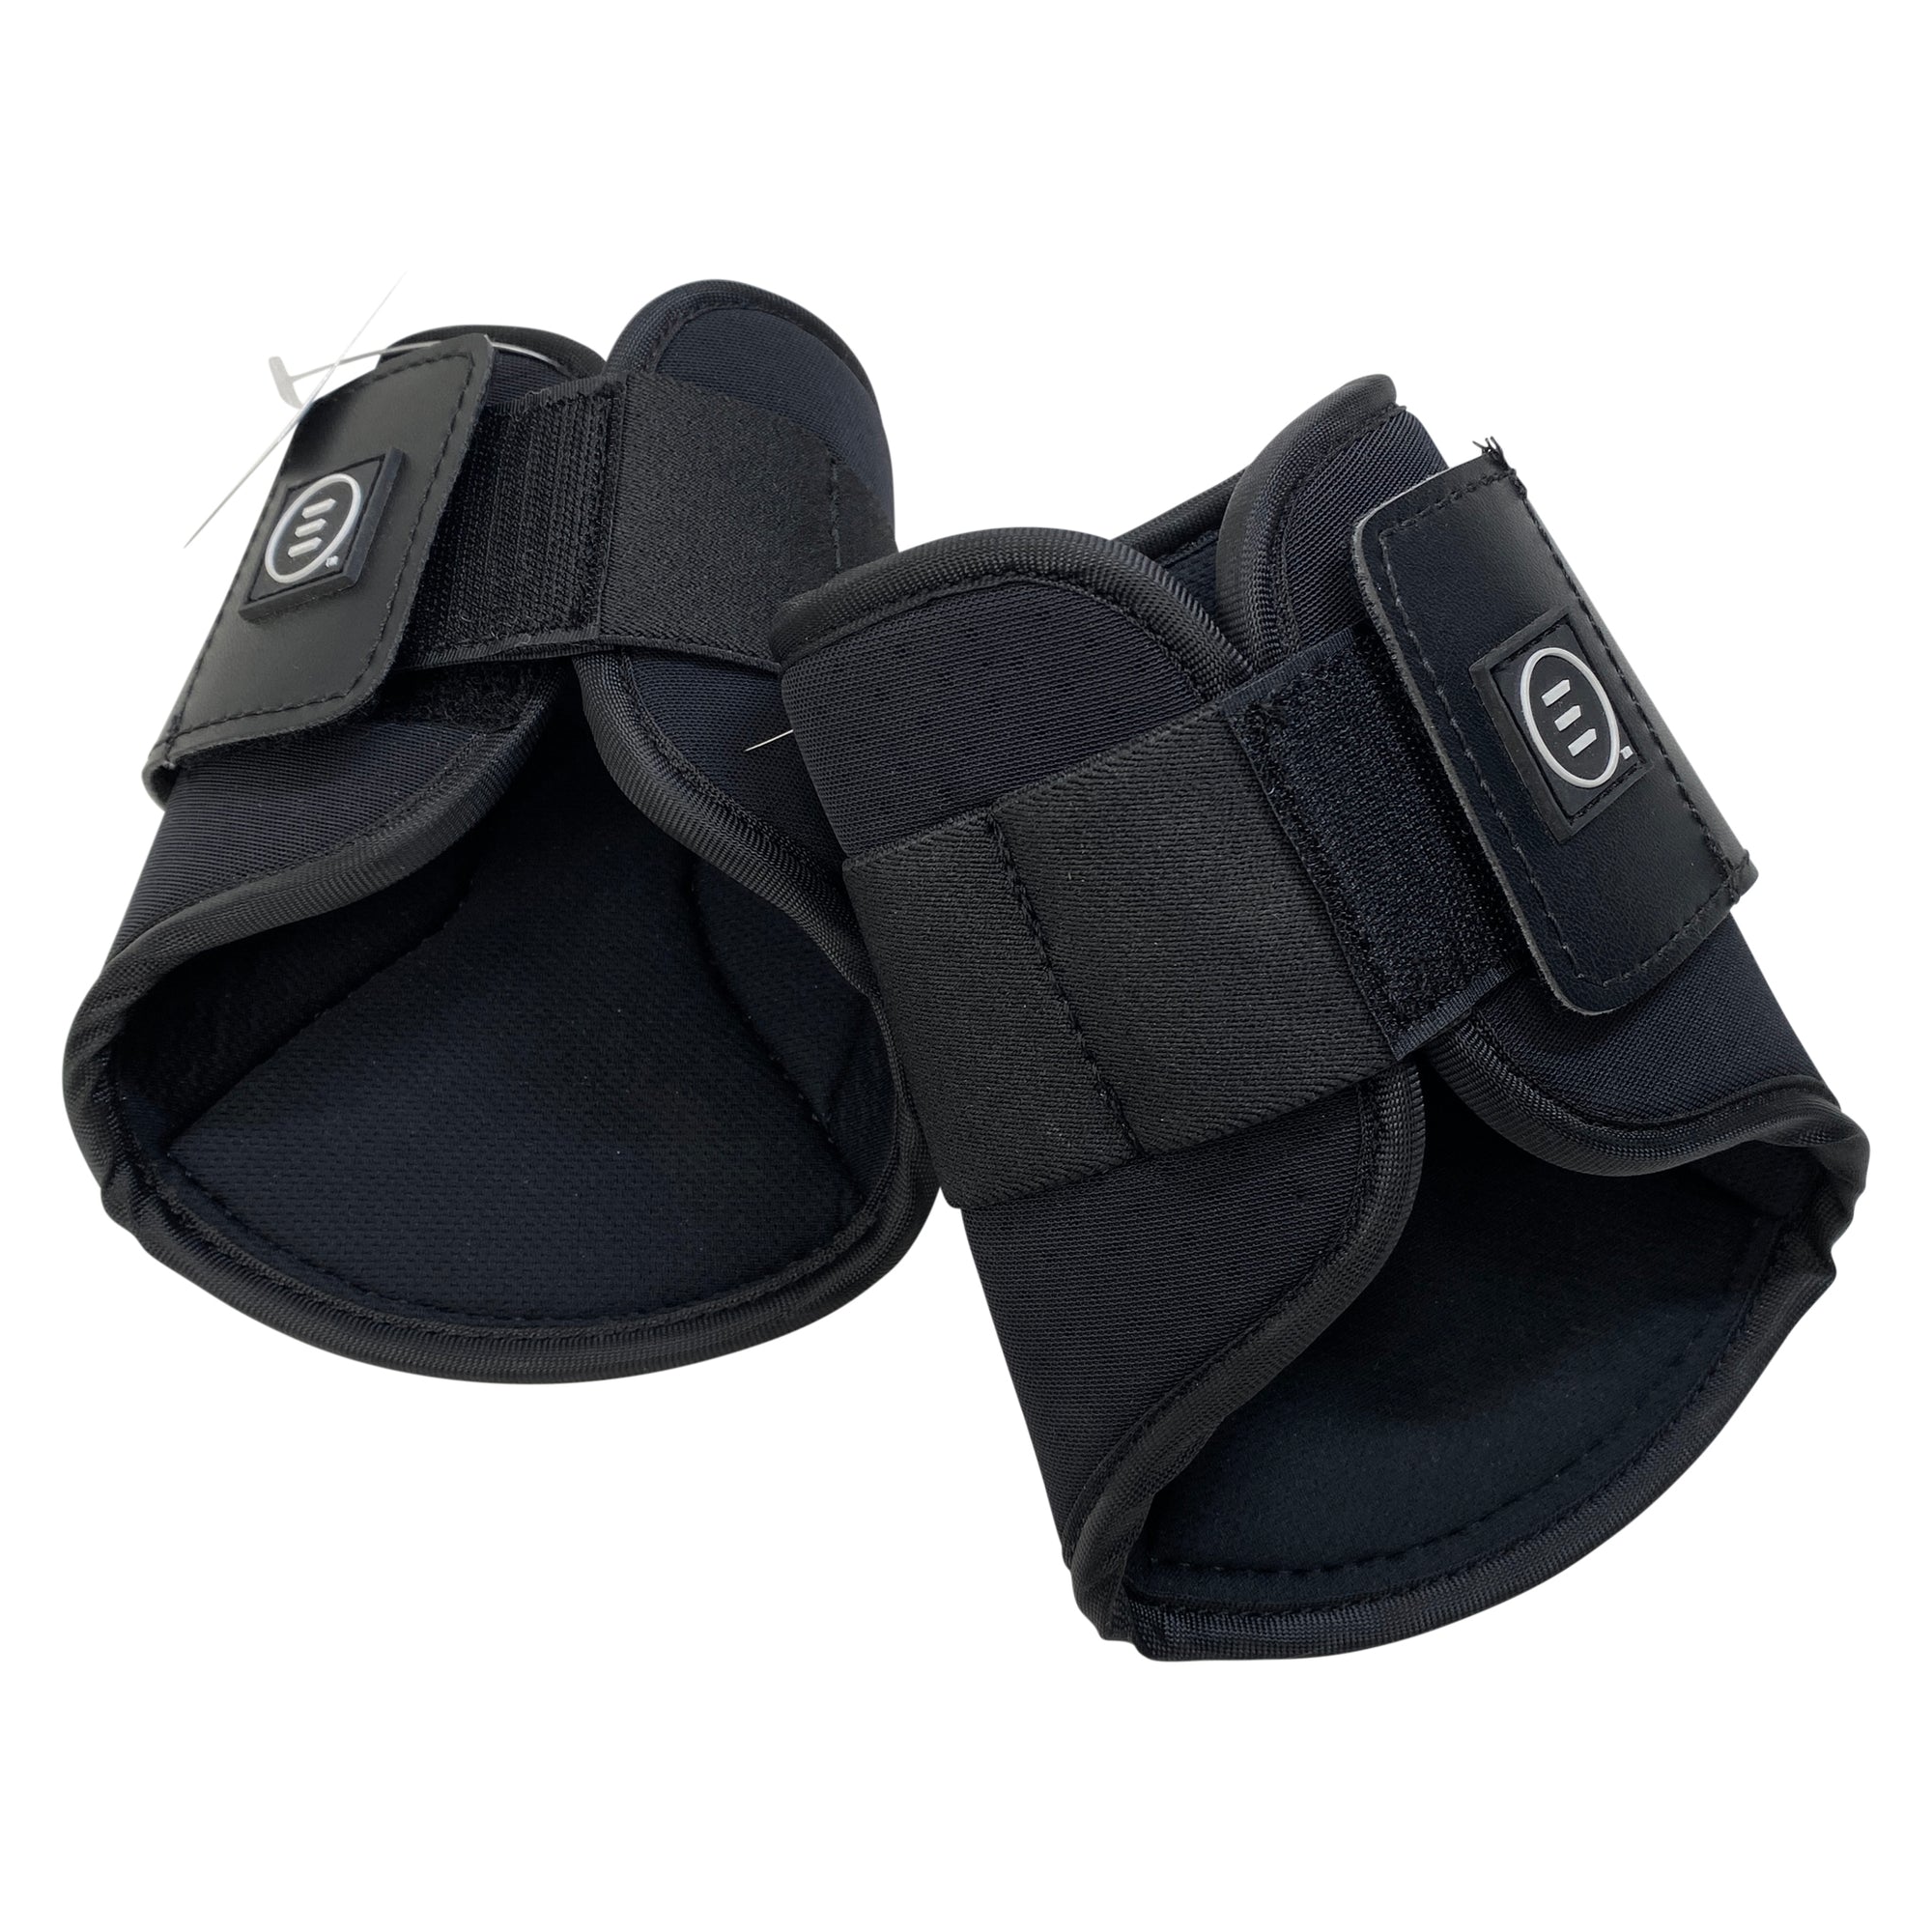 Equifit Essential EveryDay Hind Boots in Black